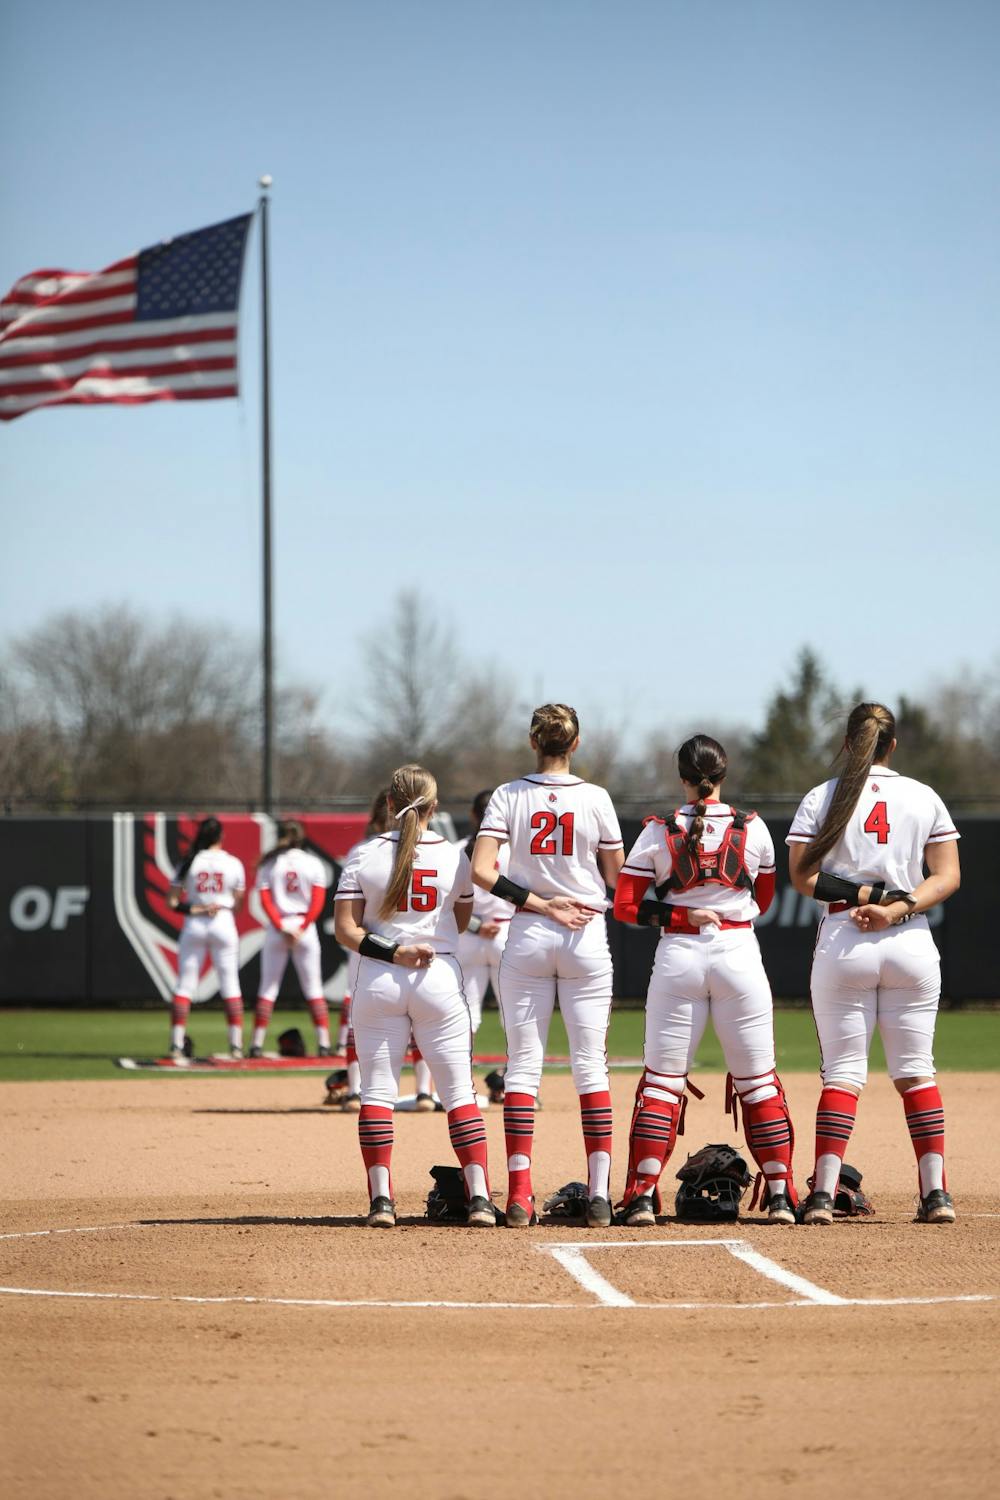 The Ball State Softball team stands on the field during the National Anthem before the game against Ohio April 10 at Varsity Softball Complex. The Cardinals lost 5-7. Amber Pietz, DN